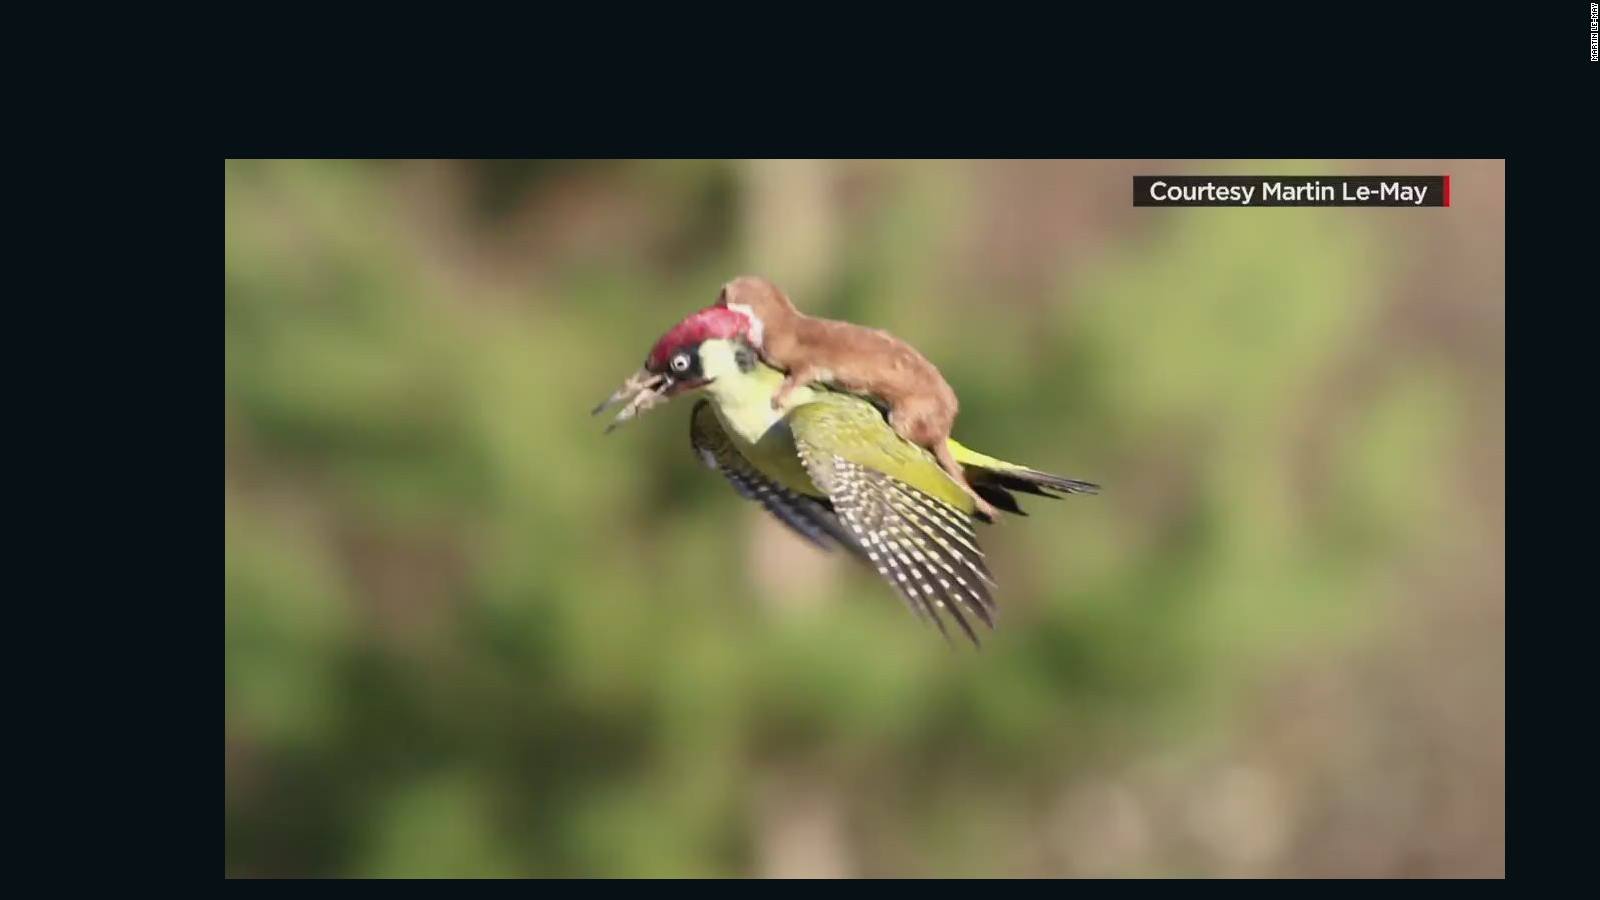 The Amazing Moment When A Weasel Flies On The Back Of A Woodpecker